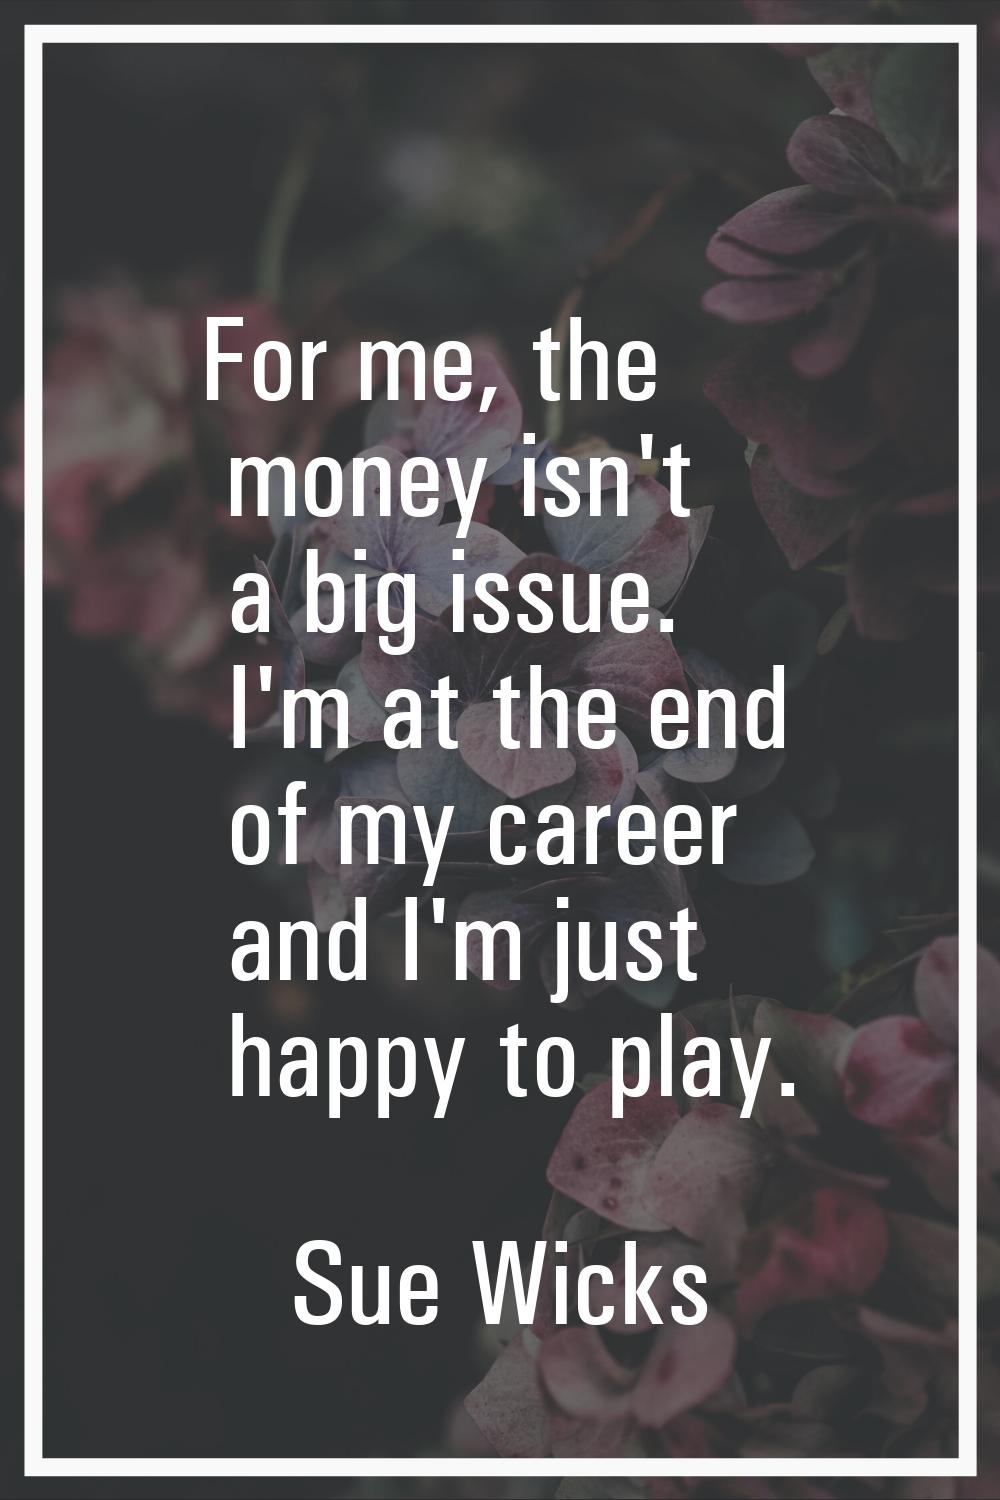 For me, the money isn't a big issue. I'm at the end of my career and I'm just happy to play.